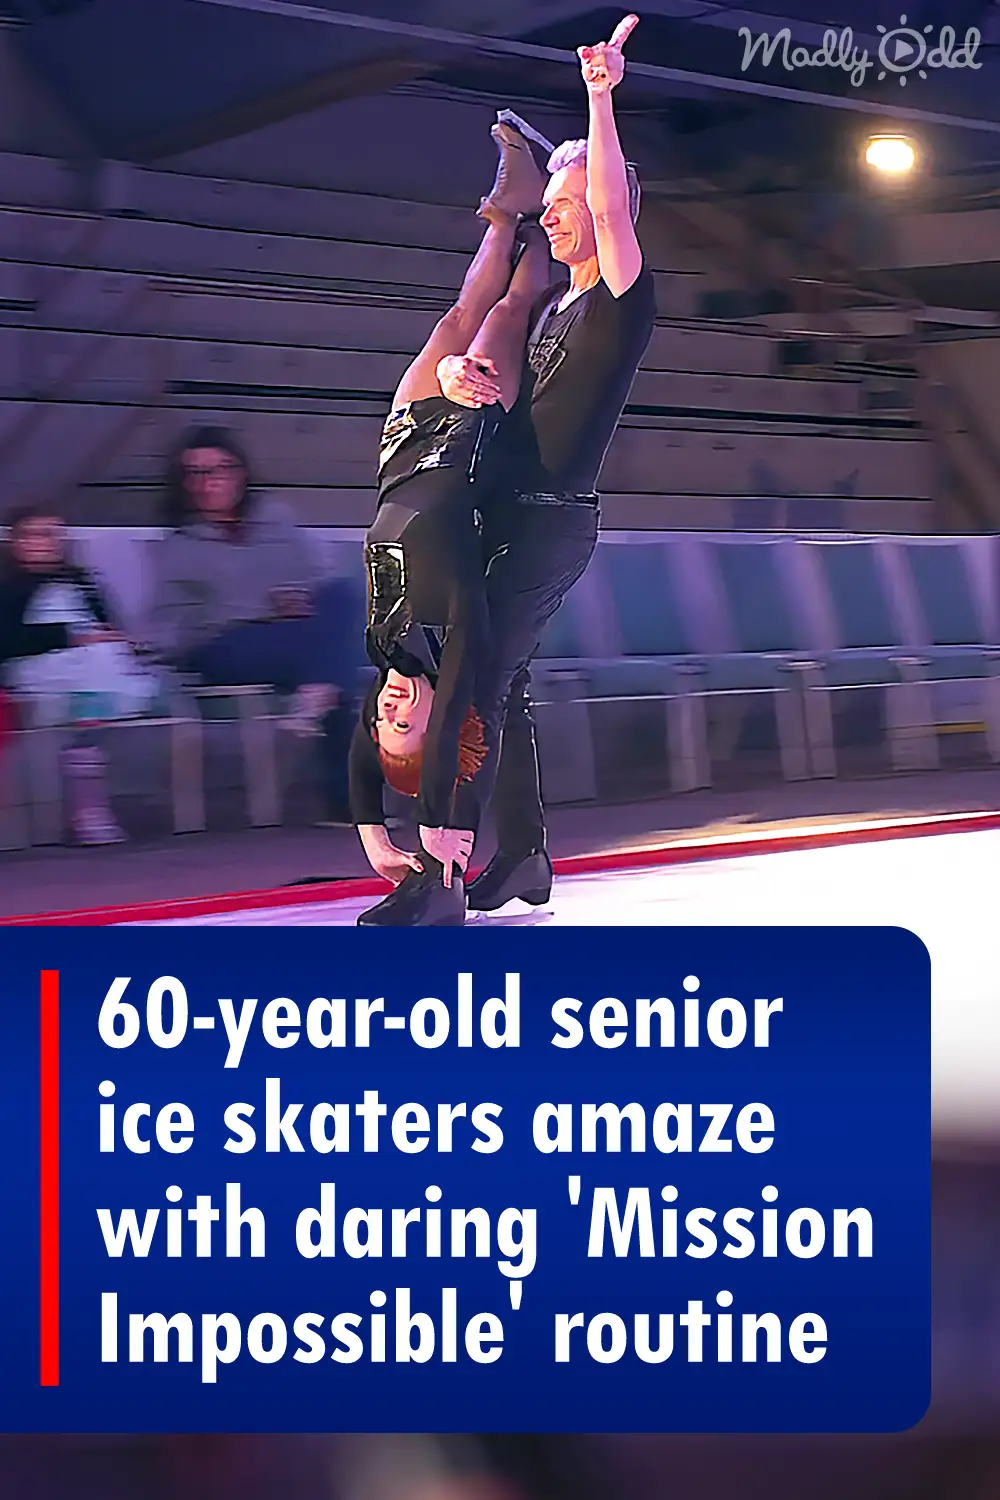 60-year-old senior ice skaters amaze with daring 'Mission Impossible' routine